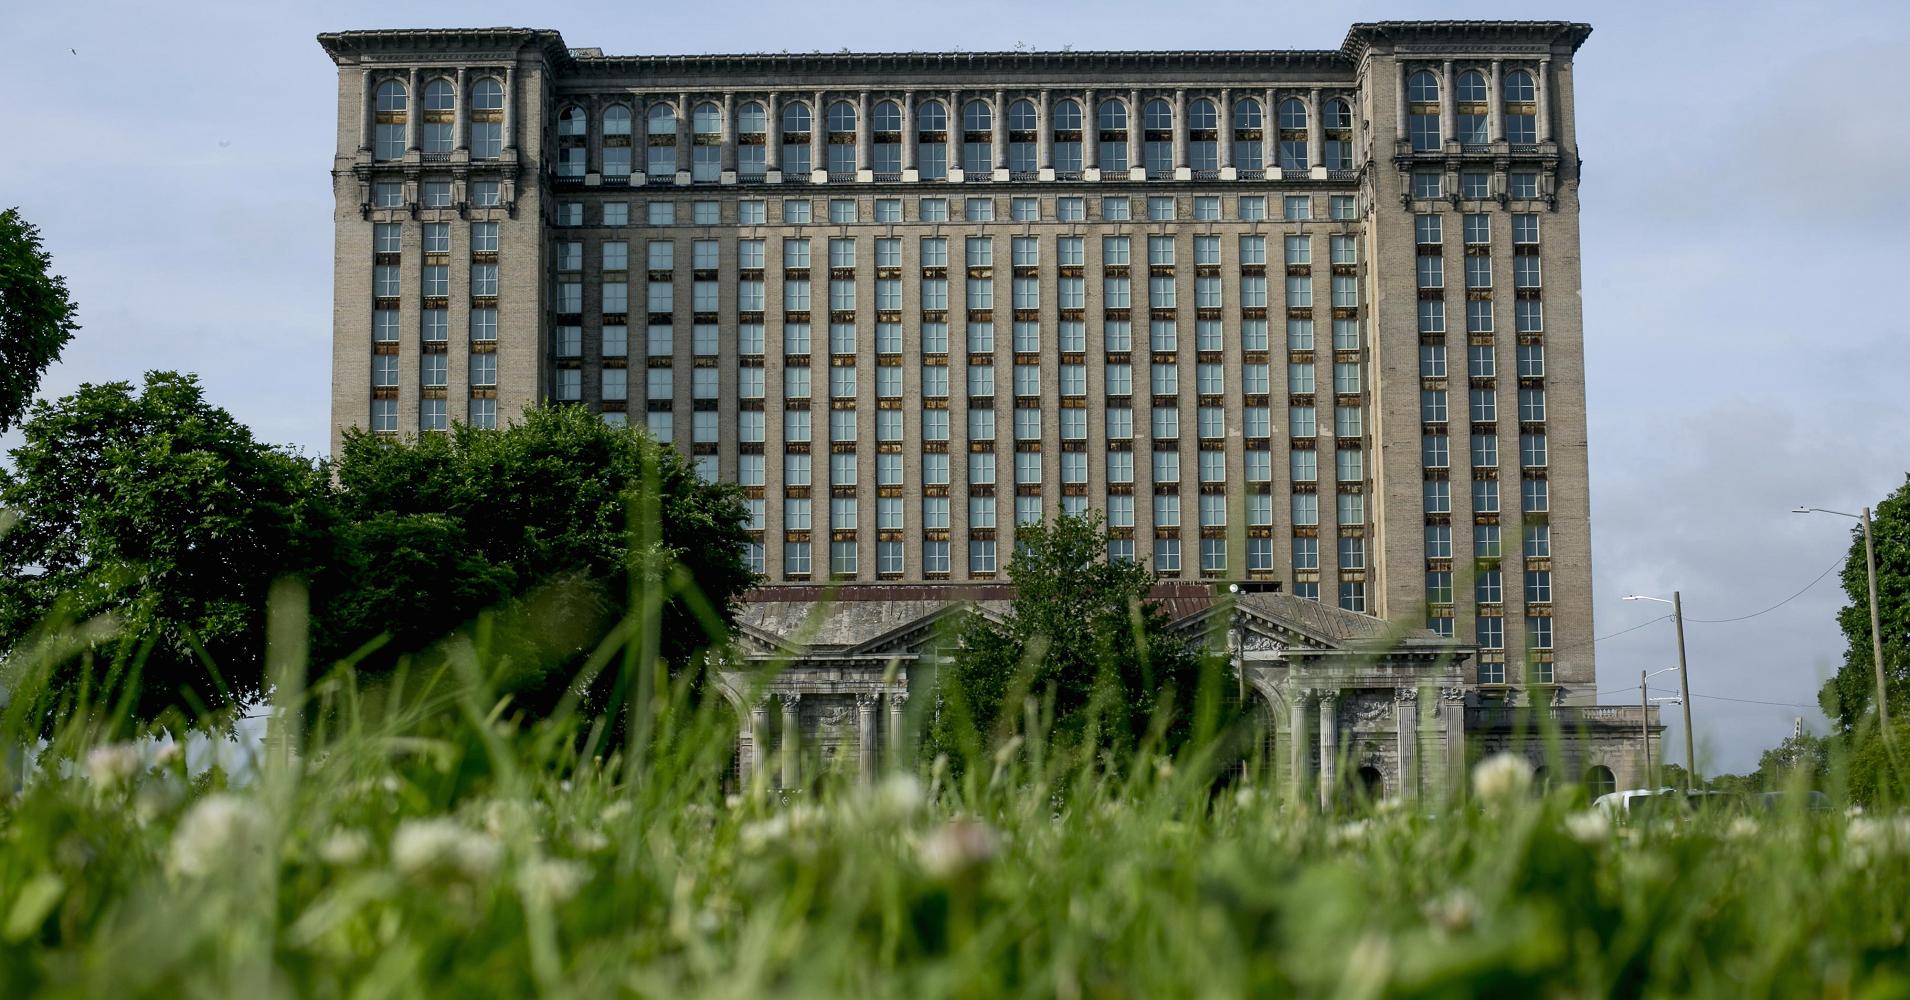 Ford plans to revive long-vacant Michigan Central station as hub for its self-driving cars